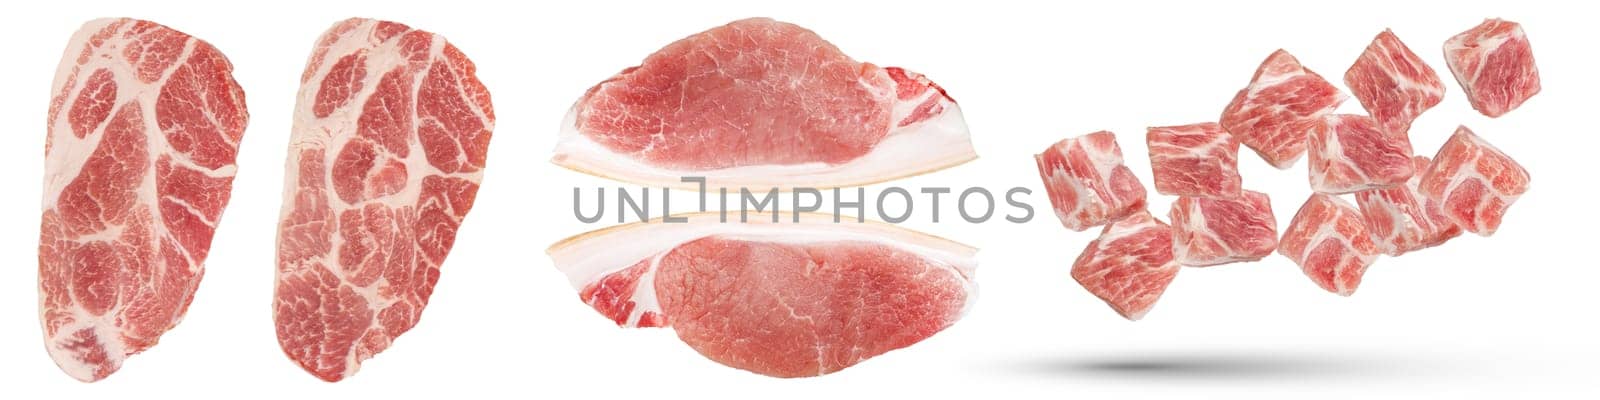 Lots of different pieces of raw pork. Set of fresh pork pieces isolated on white background. Pieces of pork for inserting into a design, project, for an advertising banner or for a label on package. by SERSOL